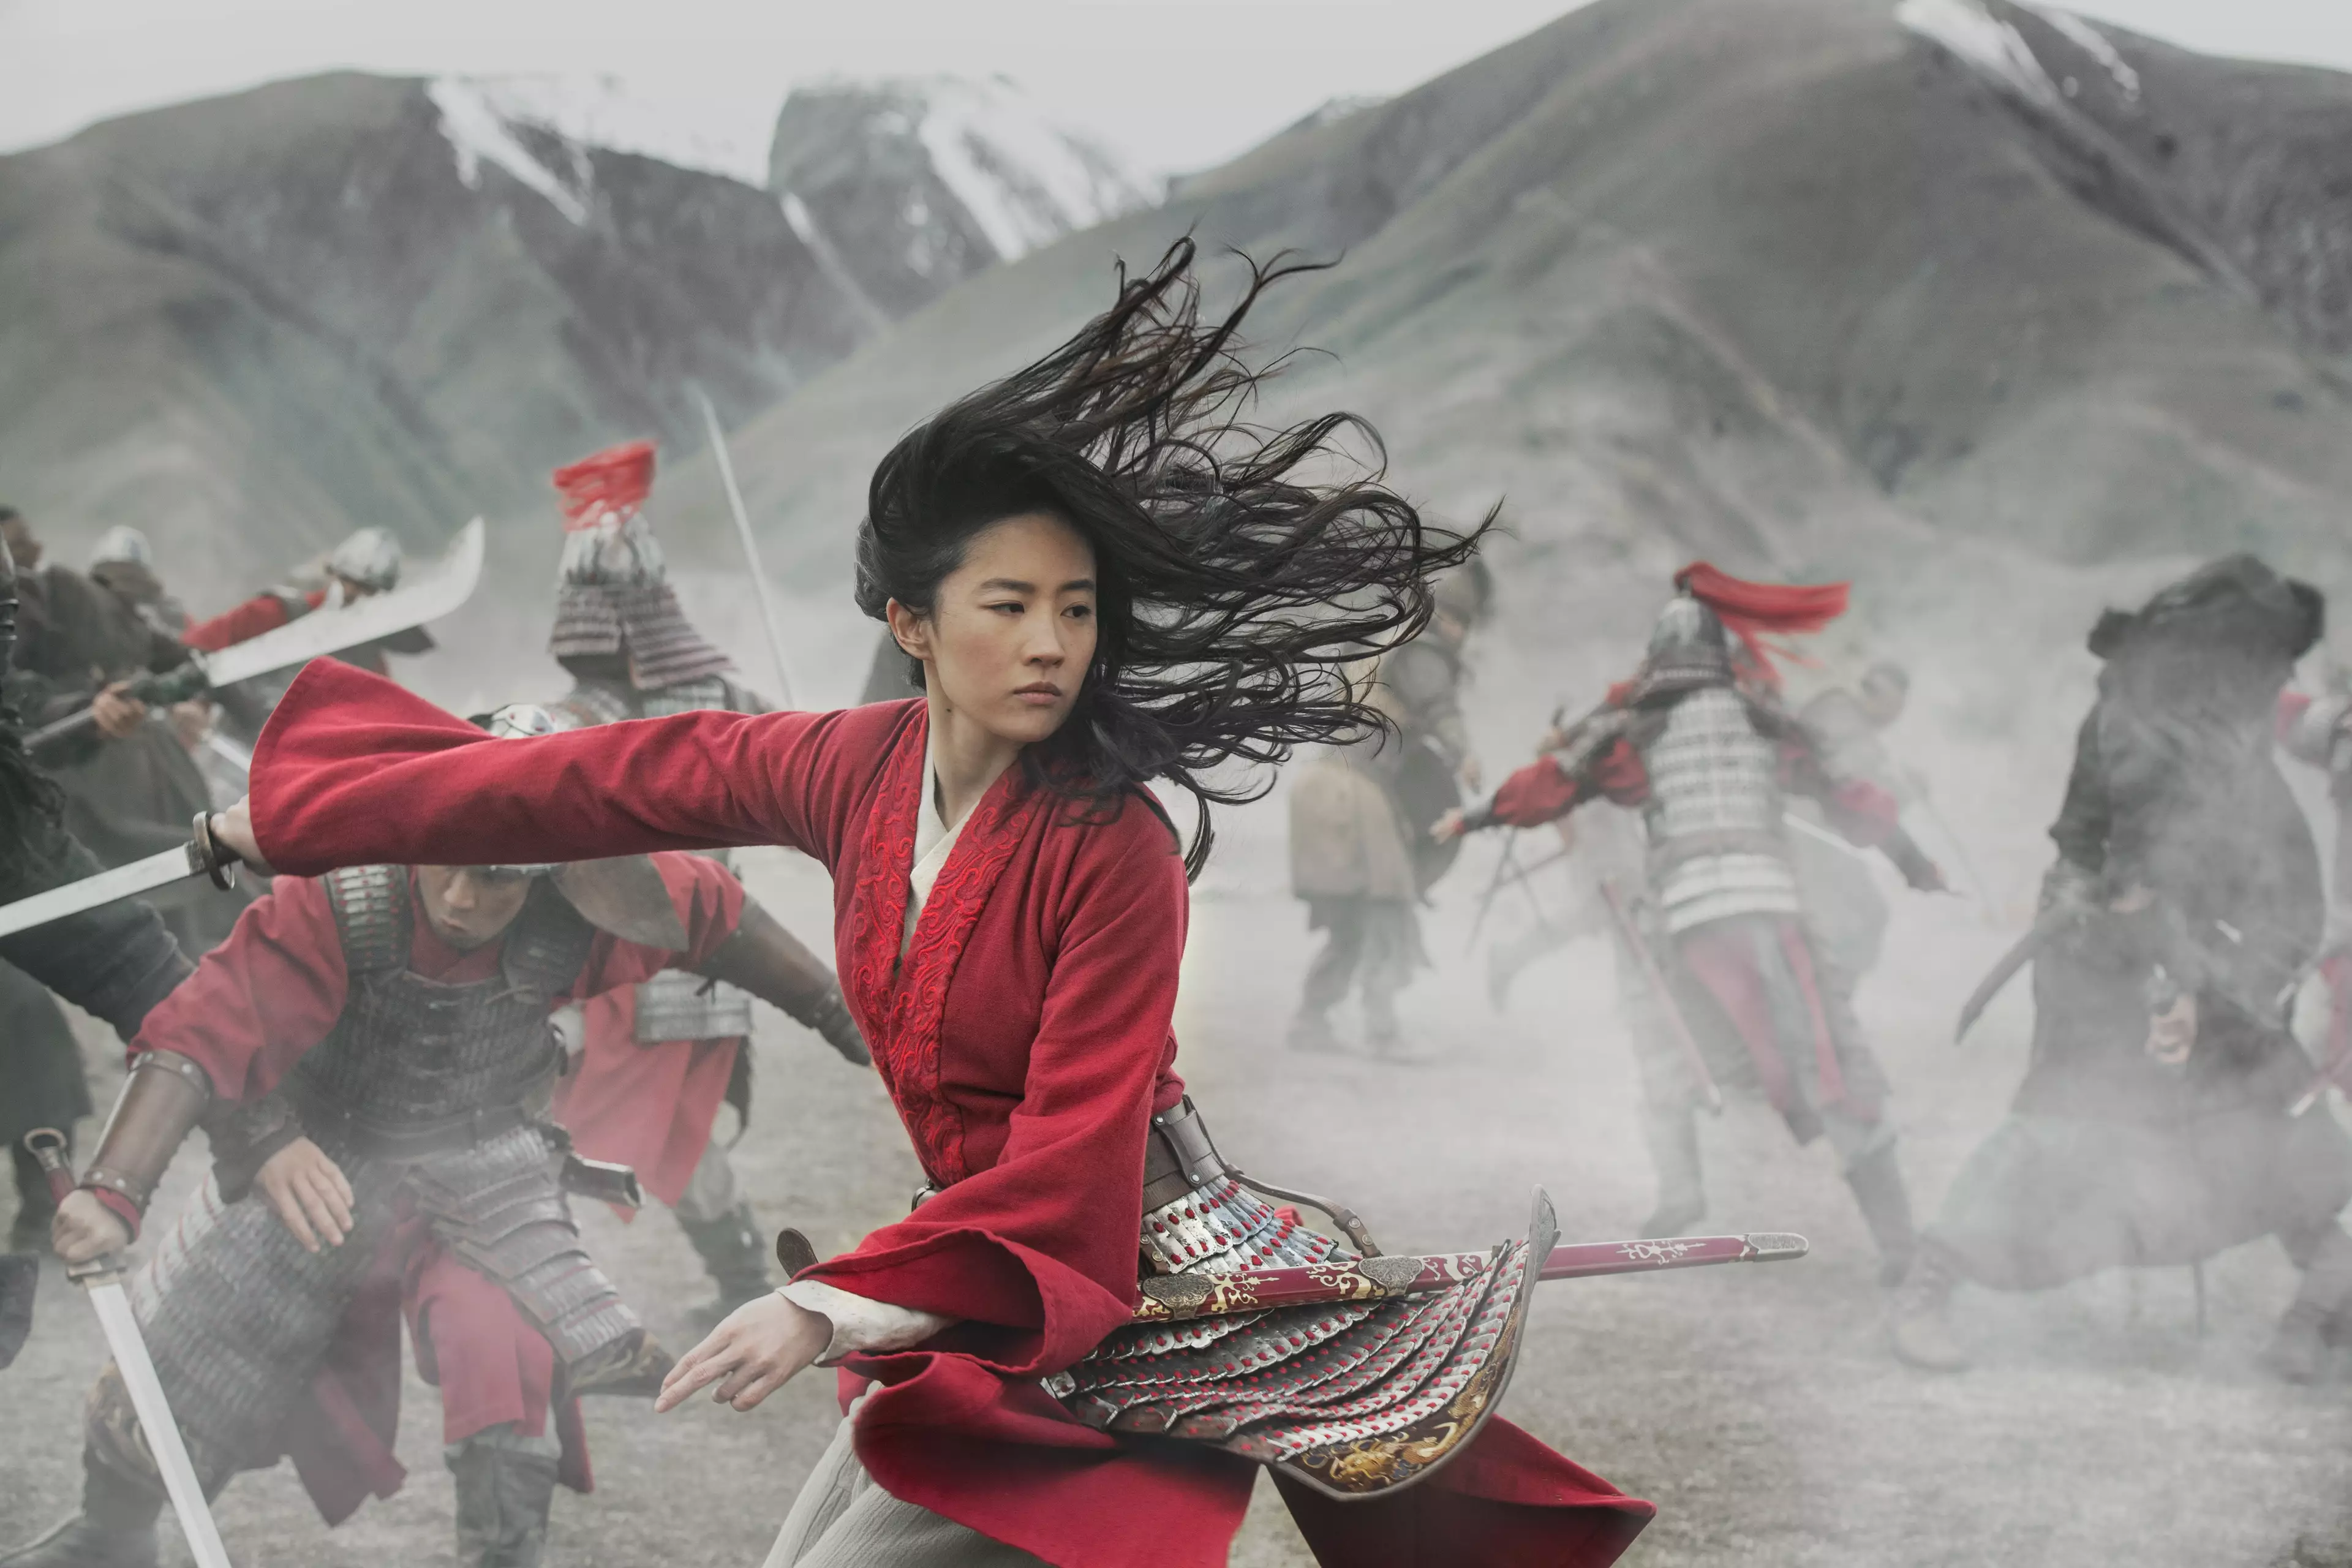 The international cast includes Yifei Liu as Mulan, pictured (